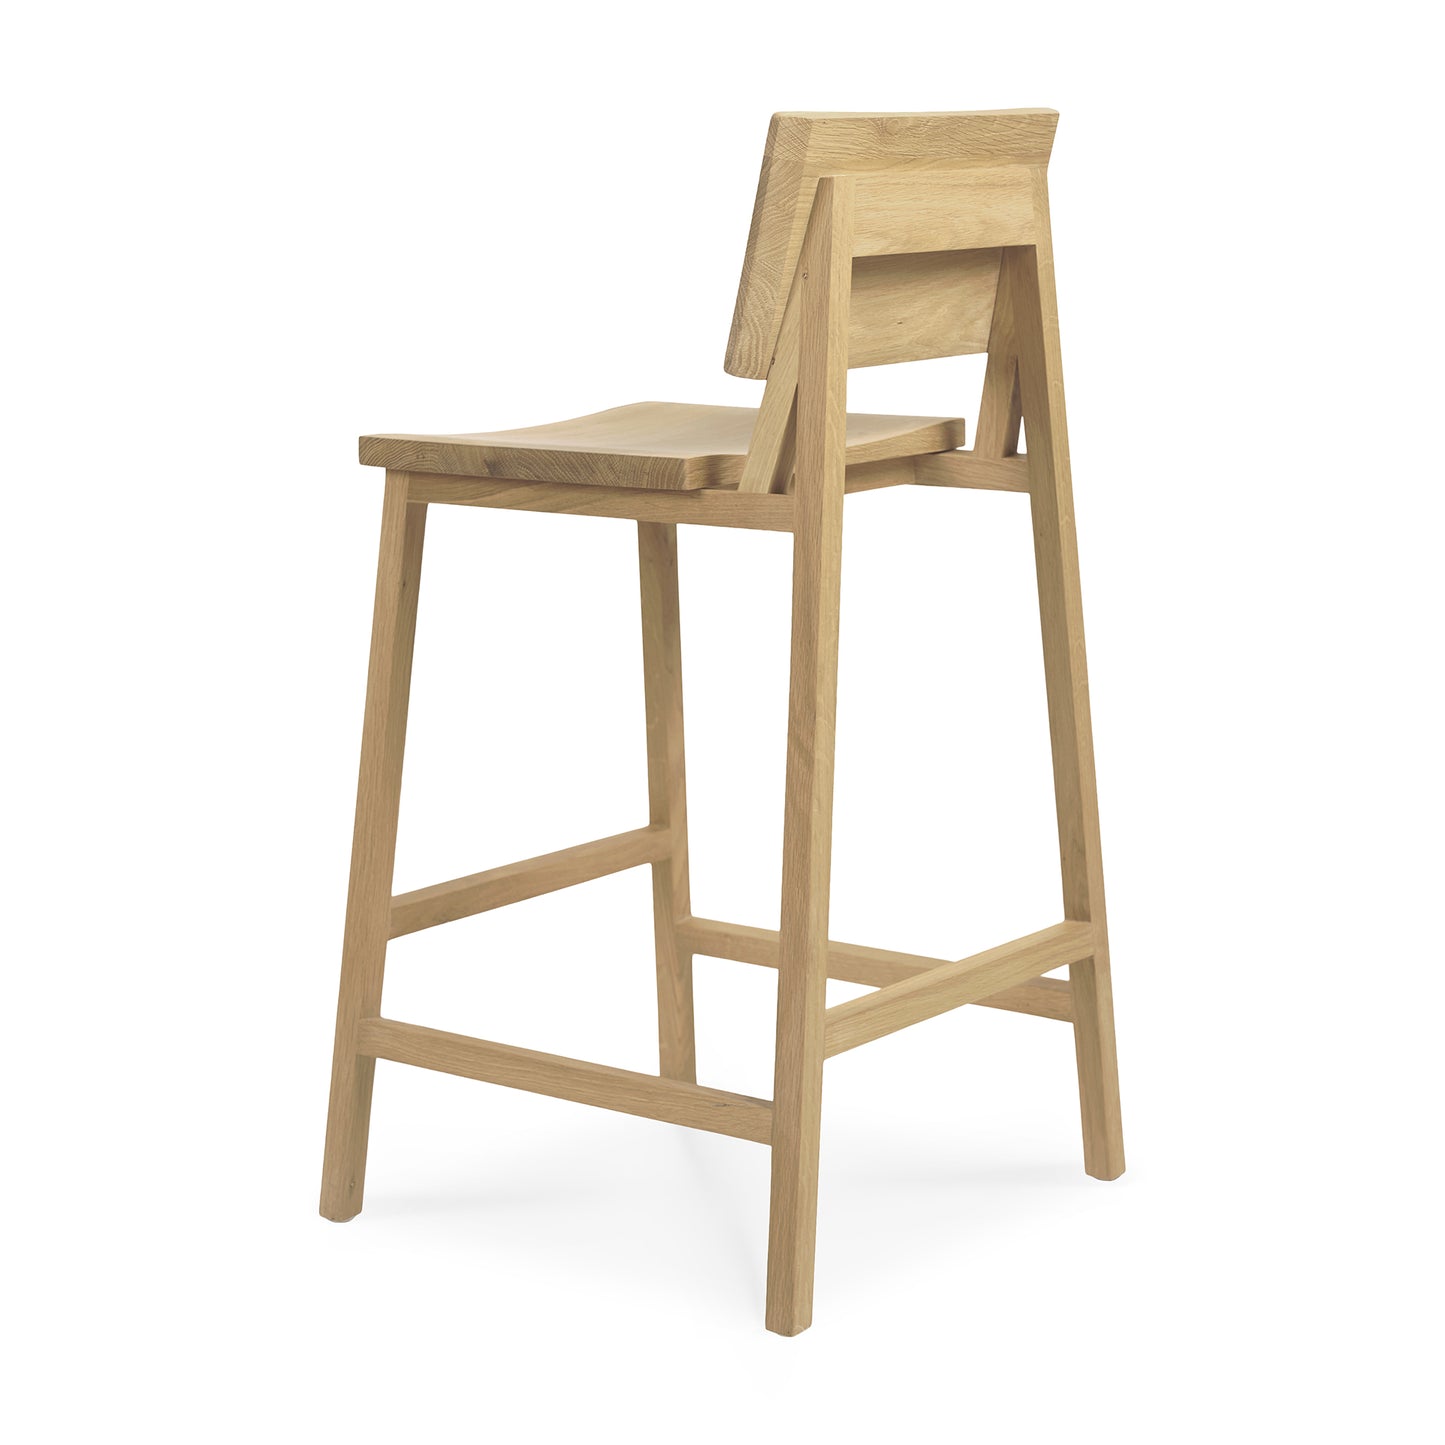 Ethnicraft Oak N3 Kitchen Counter Barstool is available from Make Your House A Home, Bendigo, Victoria, Australia